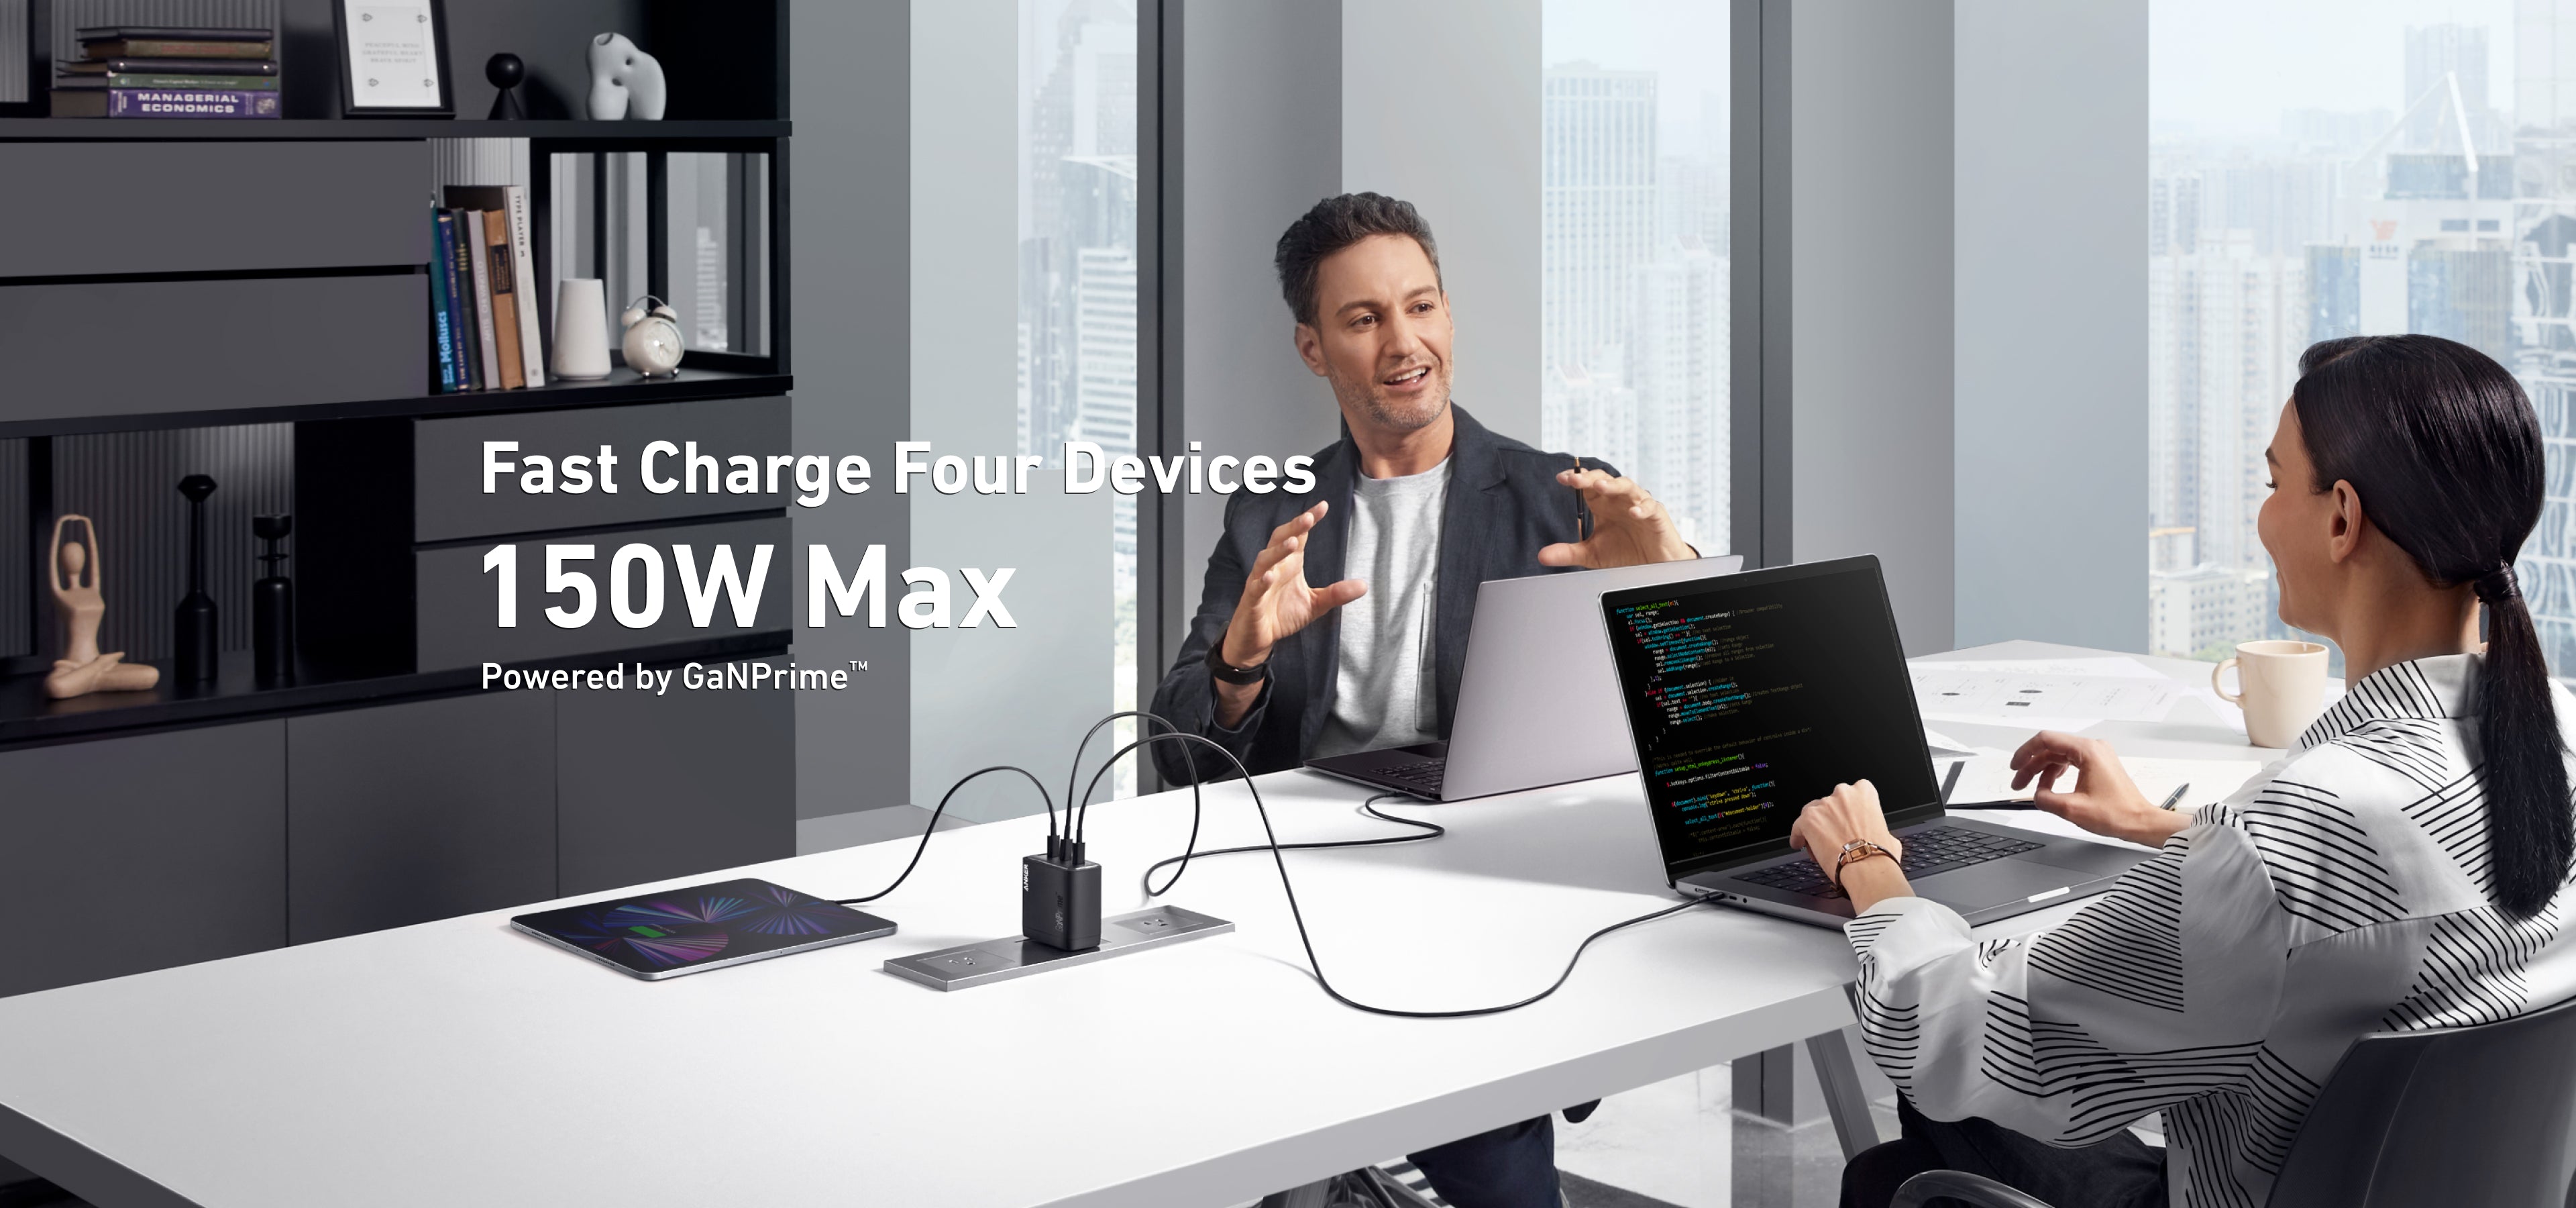 Anker 747 Charger (GaNPrime 150W) and Anker 765 USB-C to USB-C